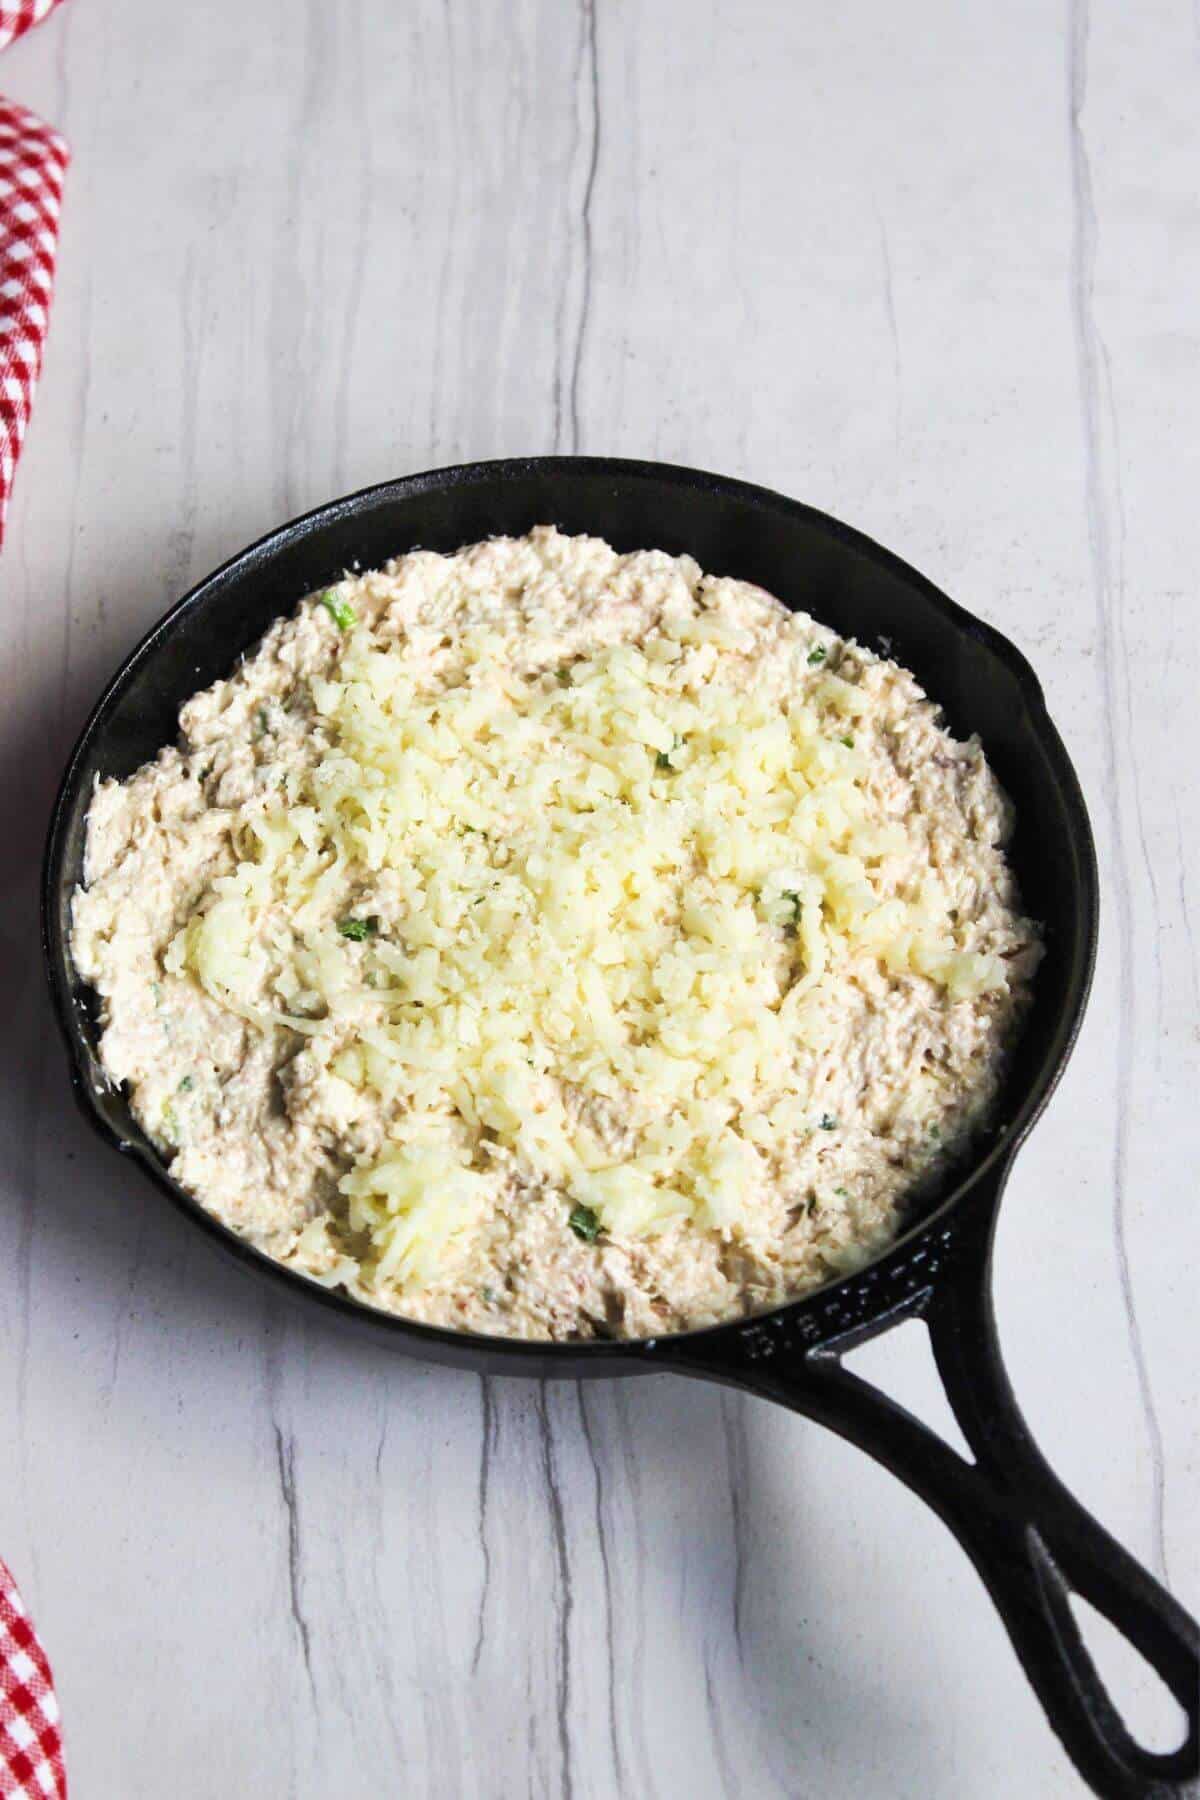 A skillet filled with crab dip mixture topped with mozzarella cheese.